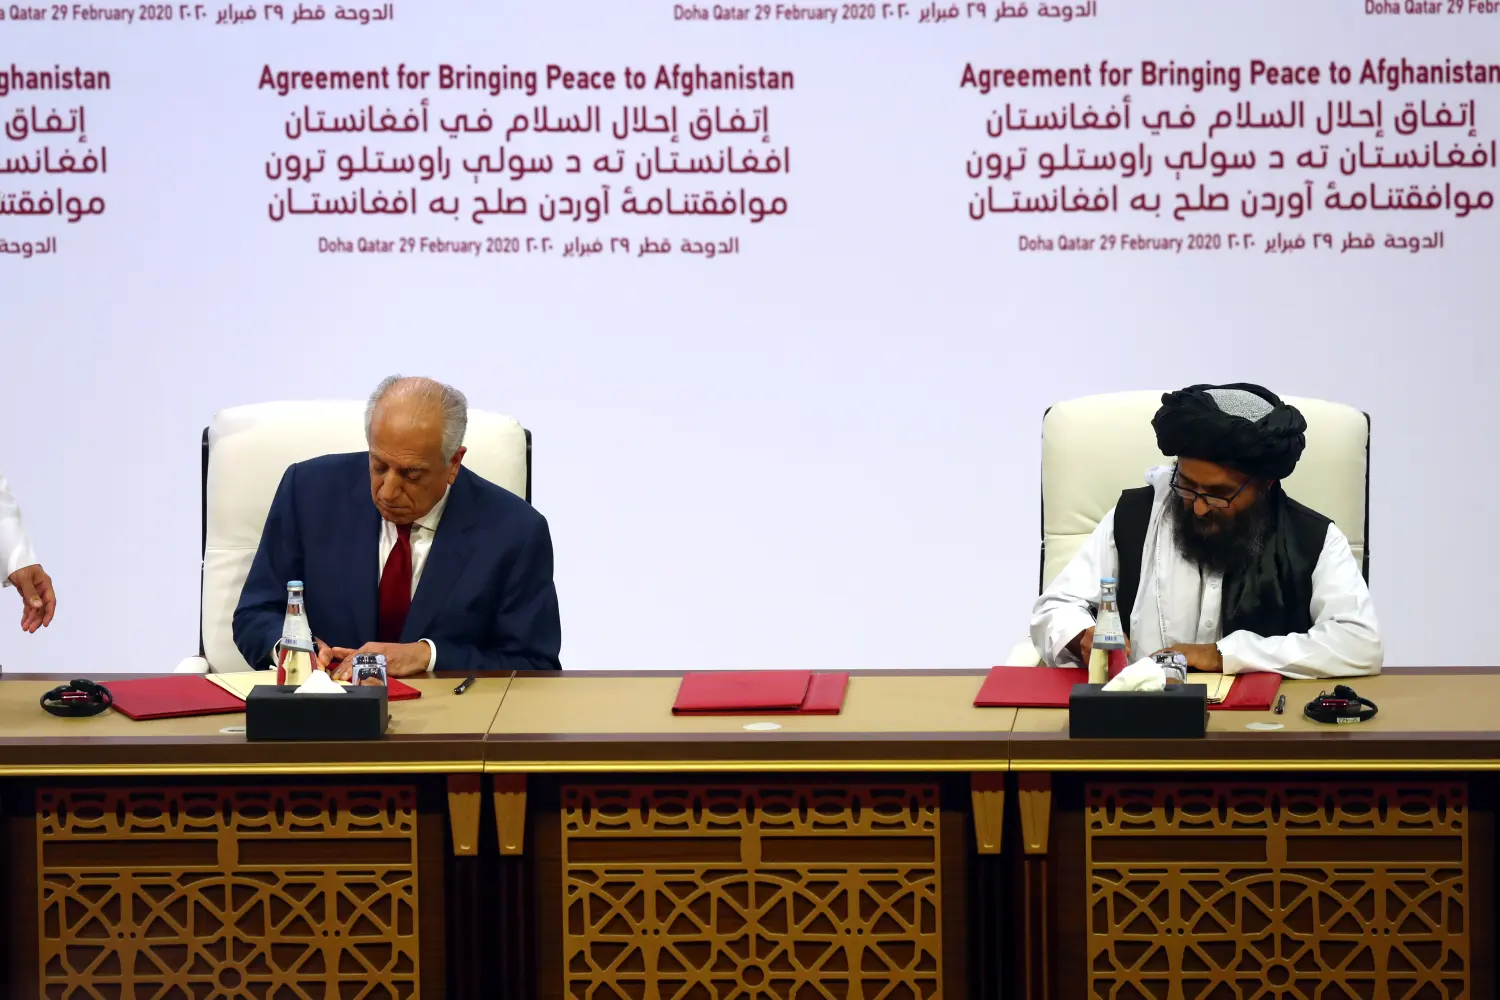 Mullah Abdul Ghani Baradar, the leader of the Taliban delegation, signs an agreement with Zalmay Khalilzad, U.S. envoy for peace in Afghanistan, at a signing agreement ceremony between members of Afghanistan's Taliban and the U.S. in Doha, Qatar February 29, 2020. REUTERS/Ibraheem al Omari